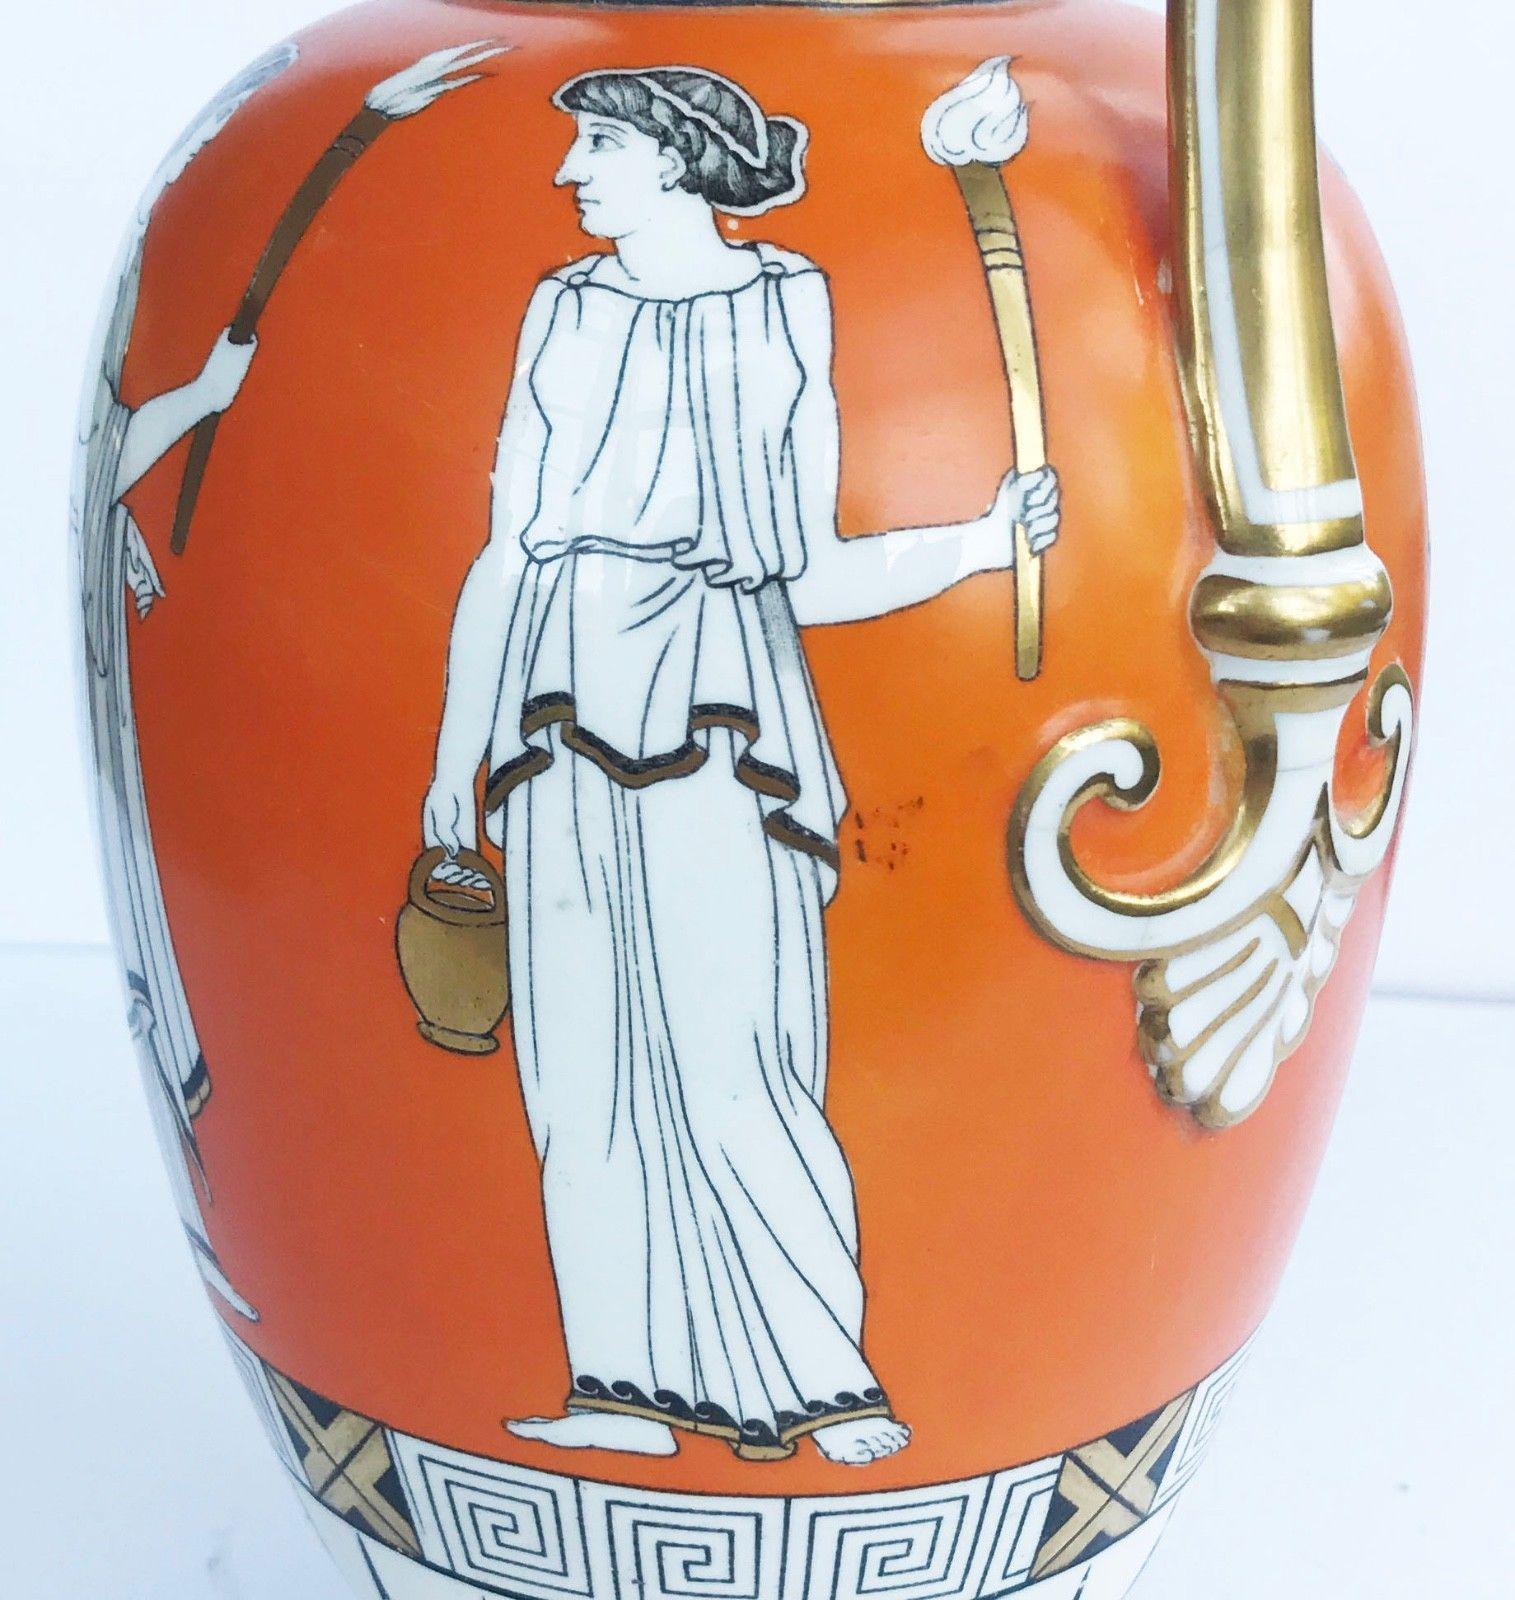 An excellent quality Samuel Alcock & Sons neoclassical porcelain ewer, circa 1860, depicting Grecian Maidens & Motif all against an orange ground and 22-carat gold highlights, him painted 4 figure shape number to base.

The last  image shows a group